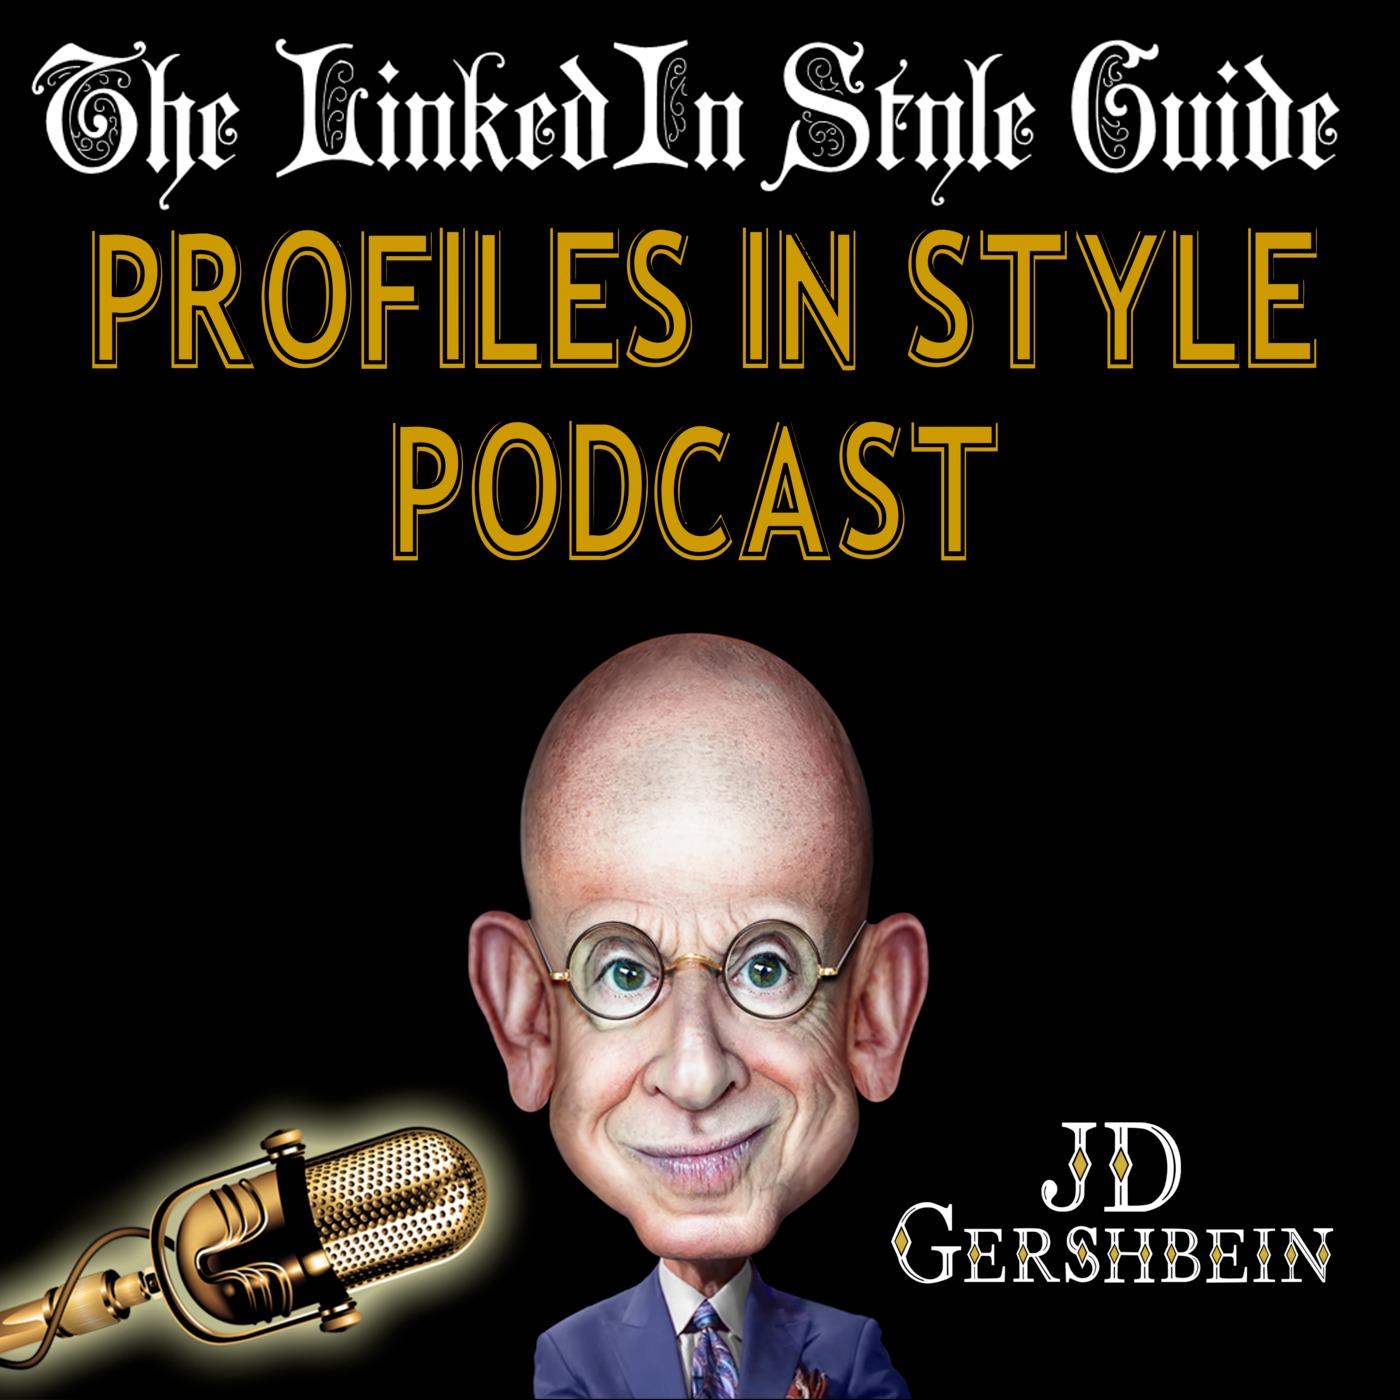 THE LINKEDIN STYLE GUIDE: Profiles in Style Podcast